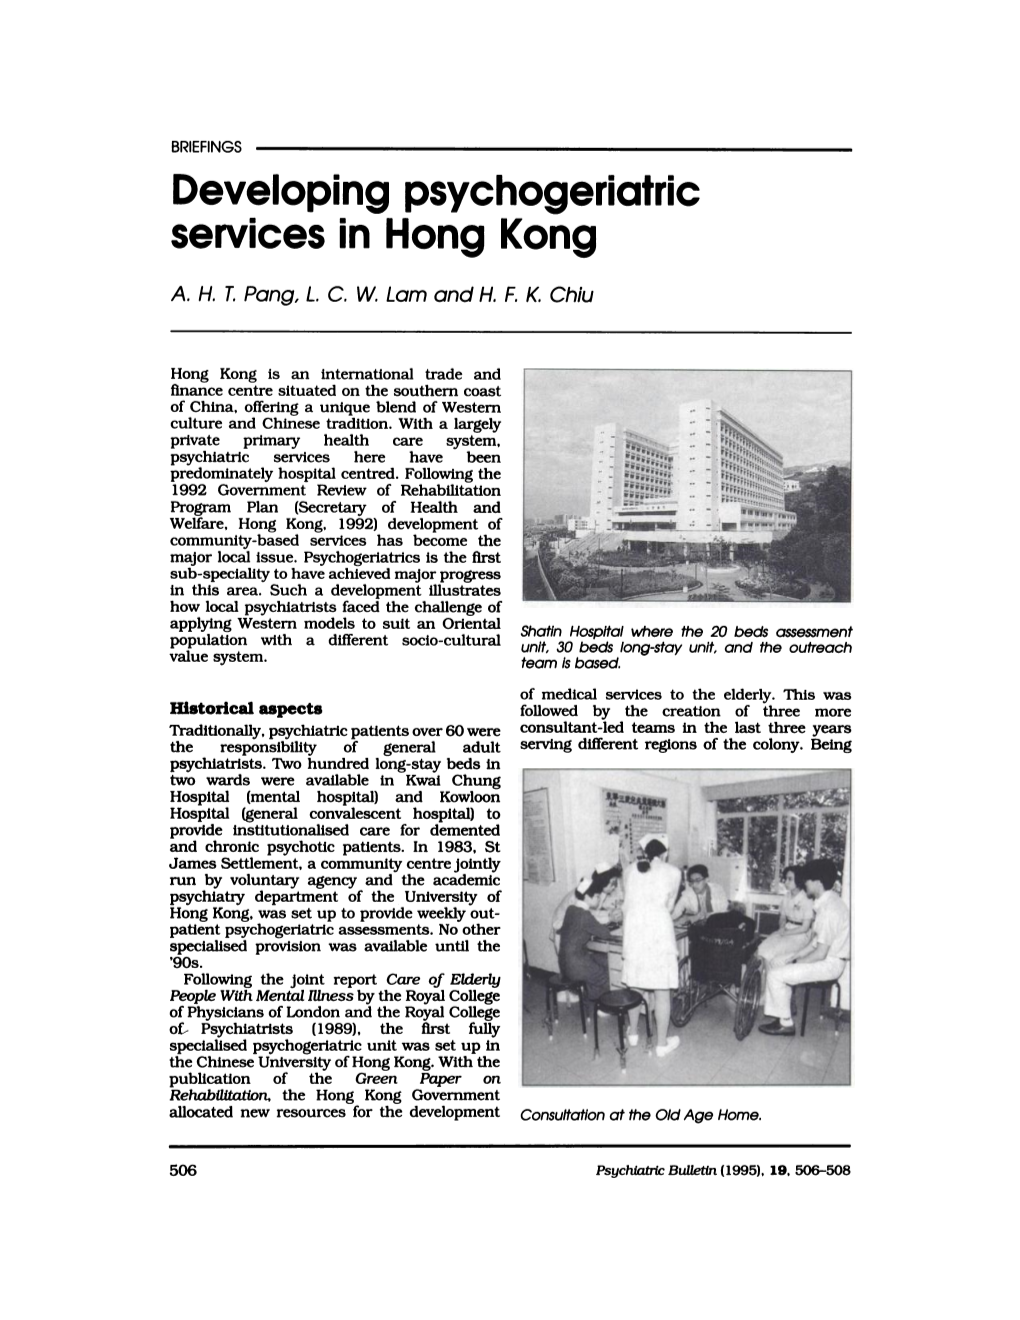 Developing Psychogeriatric Services in Hong Kong